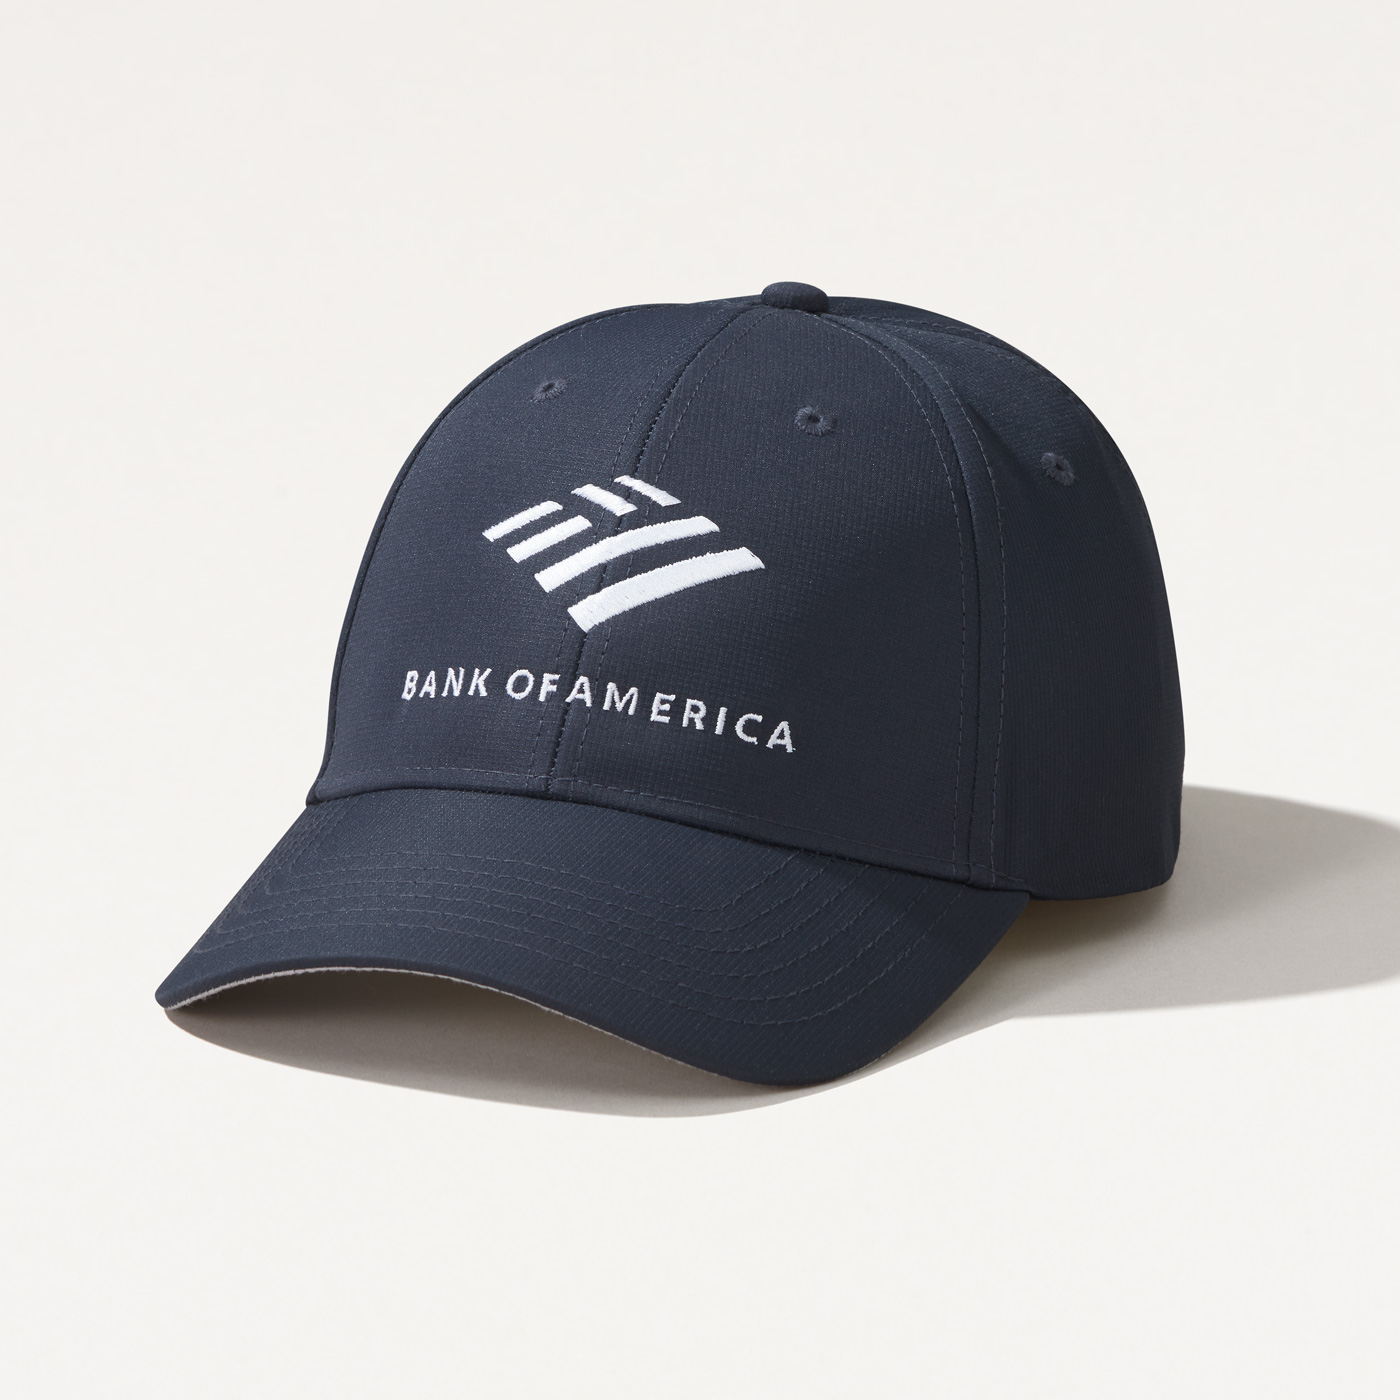 BANK OF AMERICA HAT NEW ADJUSTABLE DARK BLUE WITH LOGO 